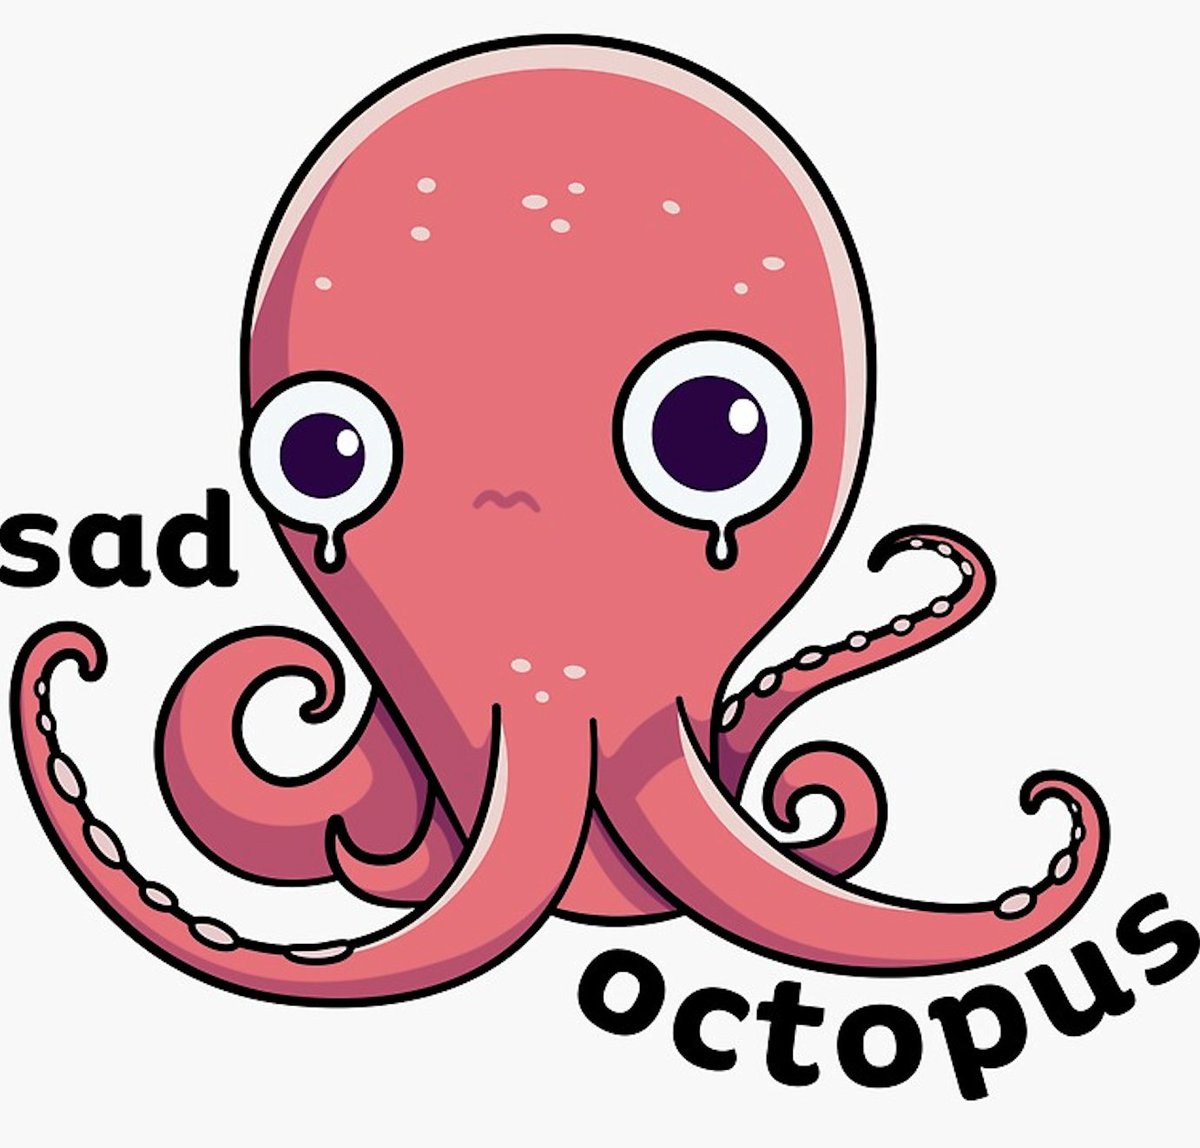 Due to miscommunication from and between @OVOEnergy and @OctopusEnergy I'm going to lose around £1,000 in export payments over April to June. And was offered £30 compensation 🫤 Hoping @g__j & @agile_phil can help find a sensible resolution from their inboxes. #SadOctopus @ofgem